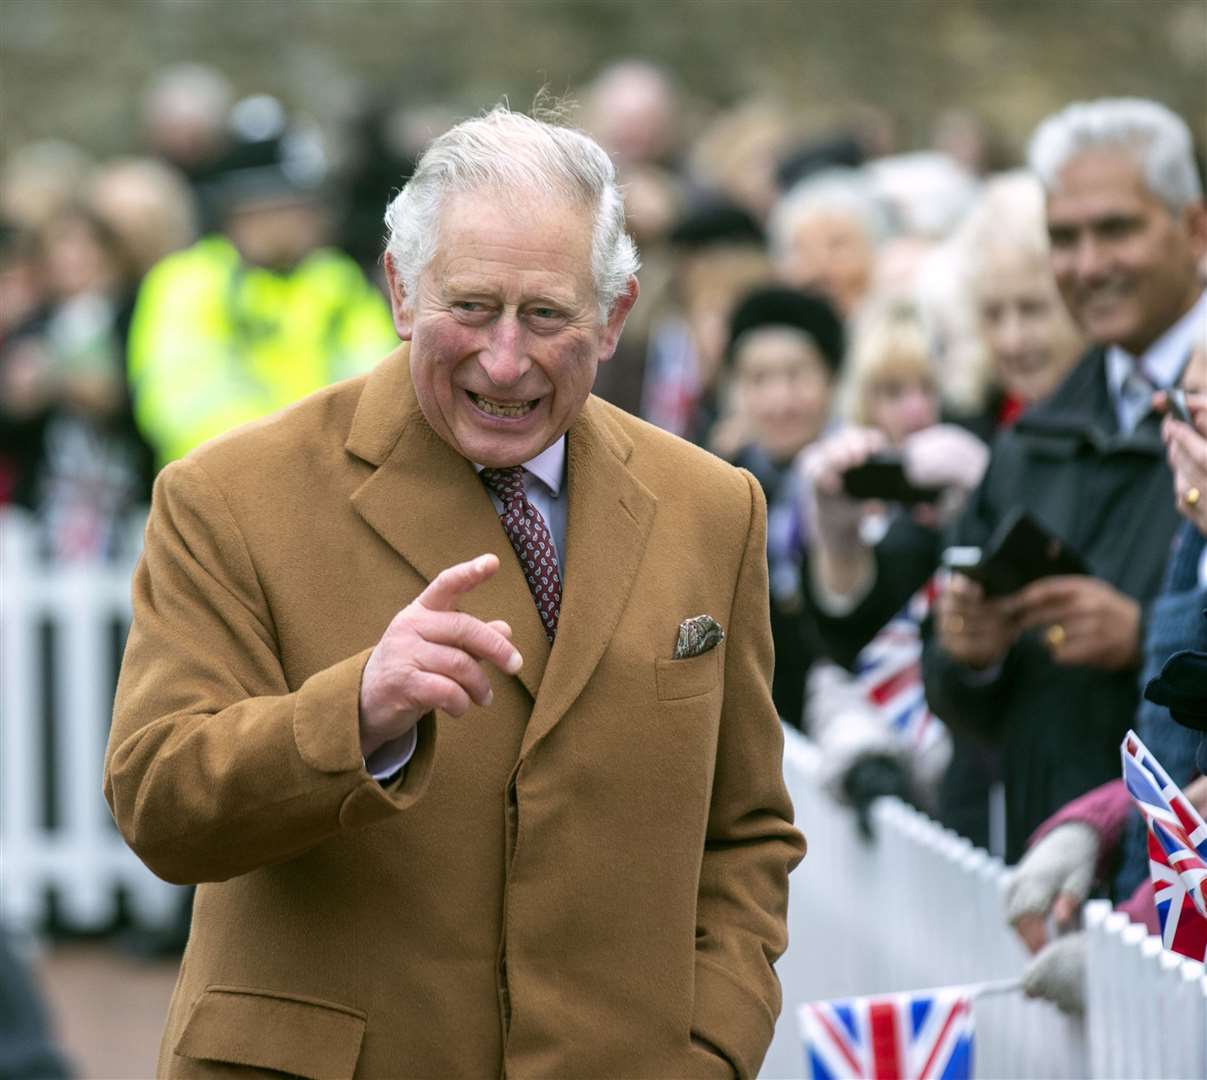 The Prince of Wales will visit Folkestone next week. Pictured here during a visit to Ely Market Place in 2018. Photo credit: Steve Parsons/PA Wire